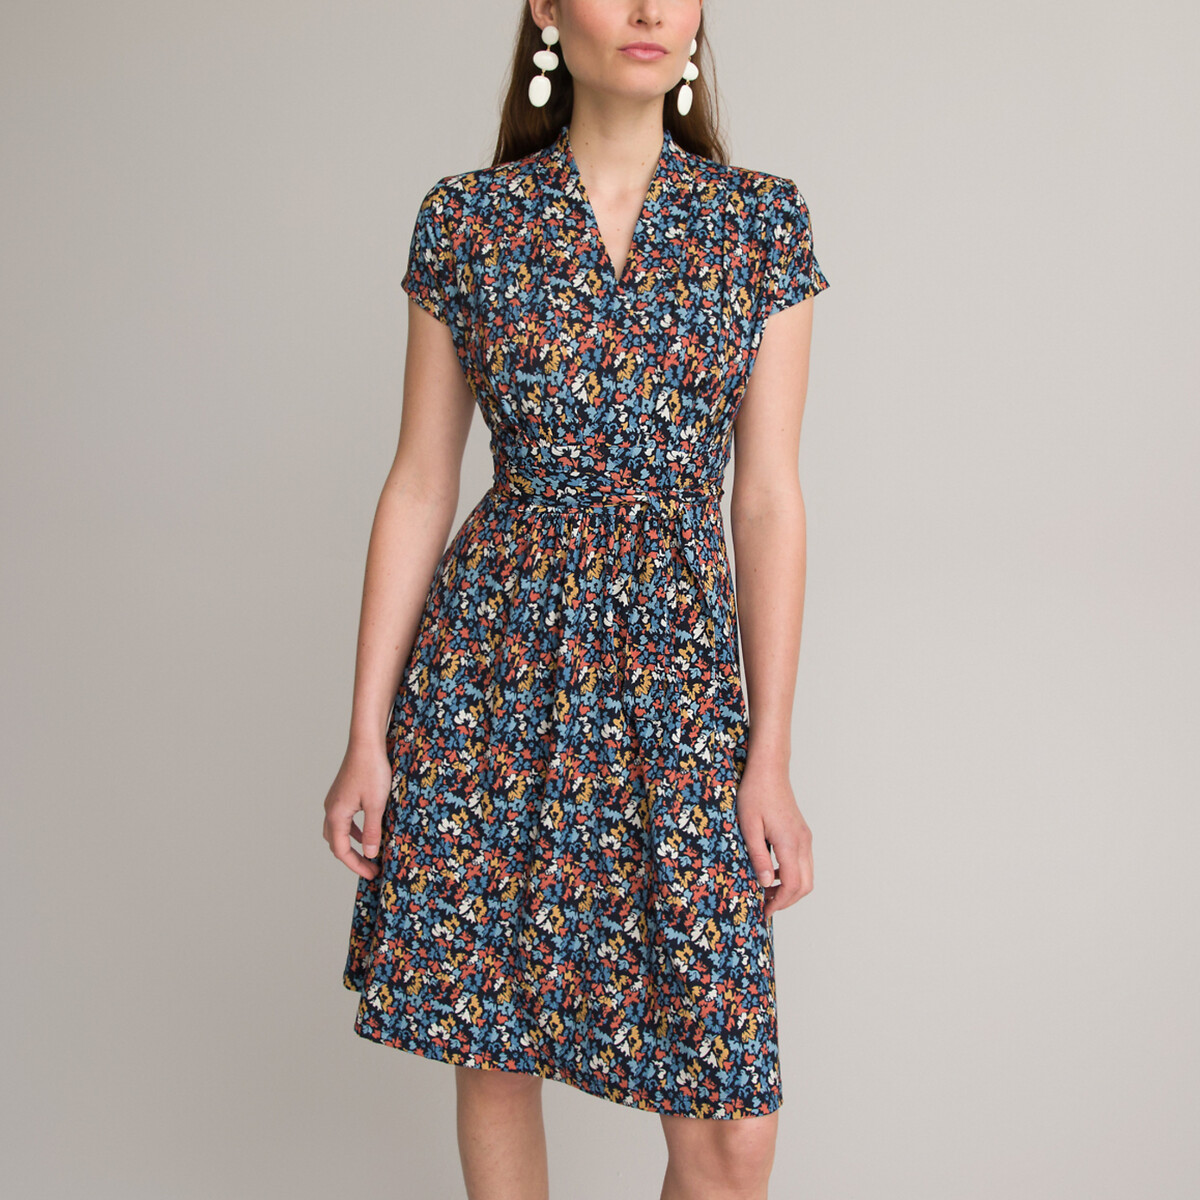 Full Mid-Length Dress in Floral Print